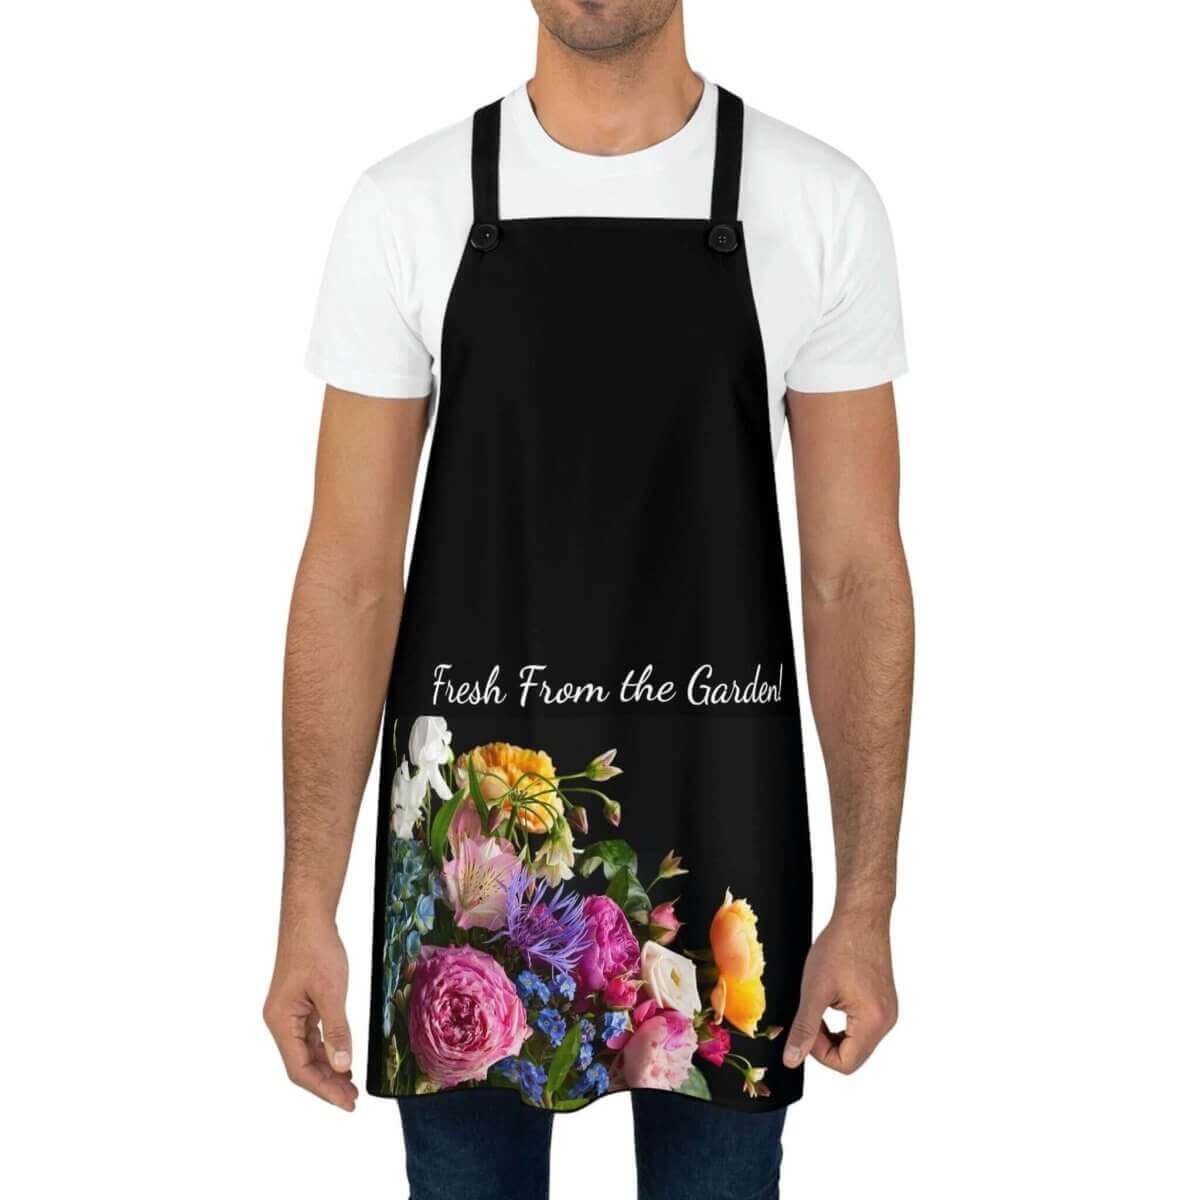 "Fresh From the Garden" Apron - Hearth Home & Living